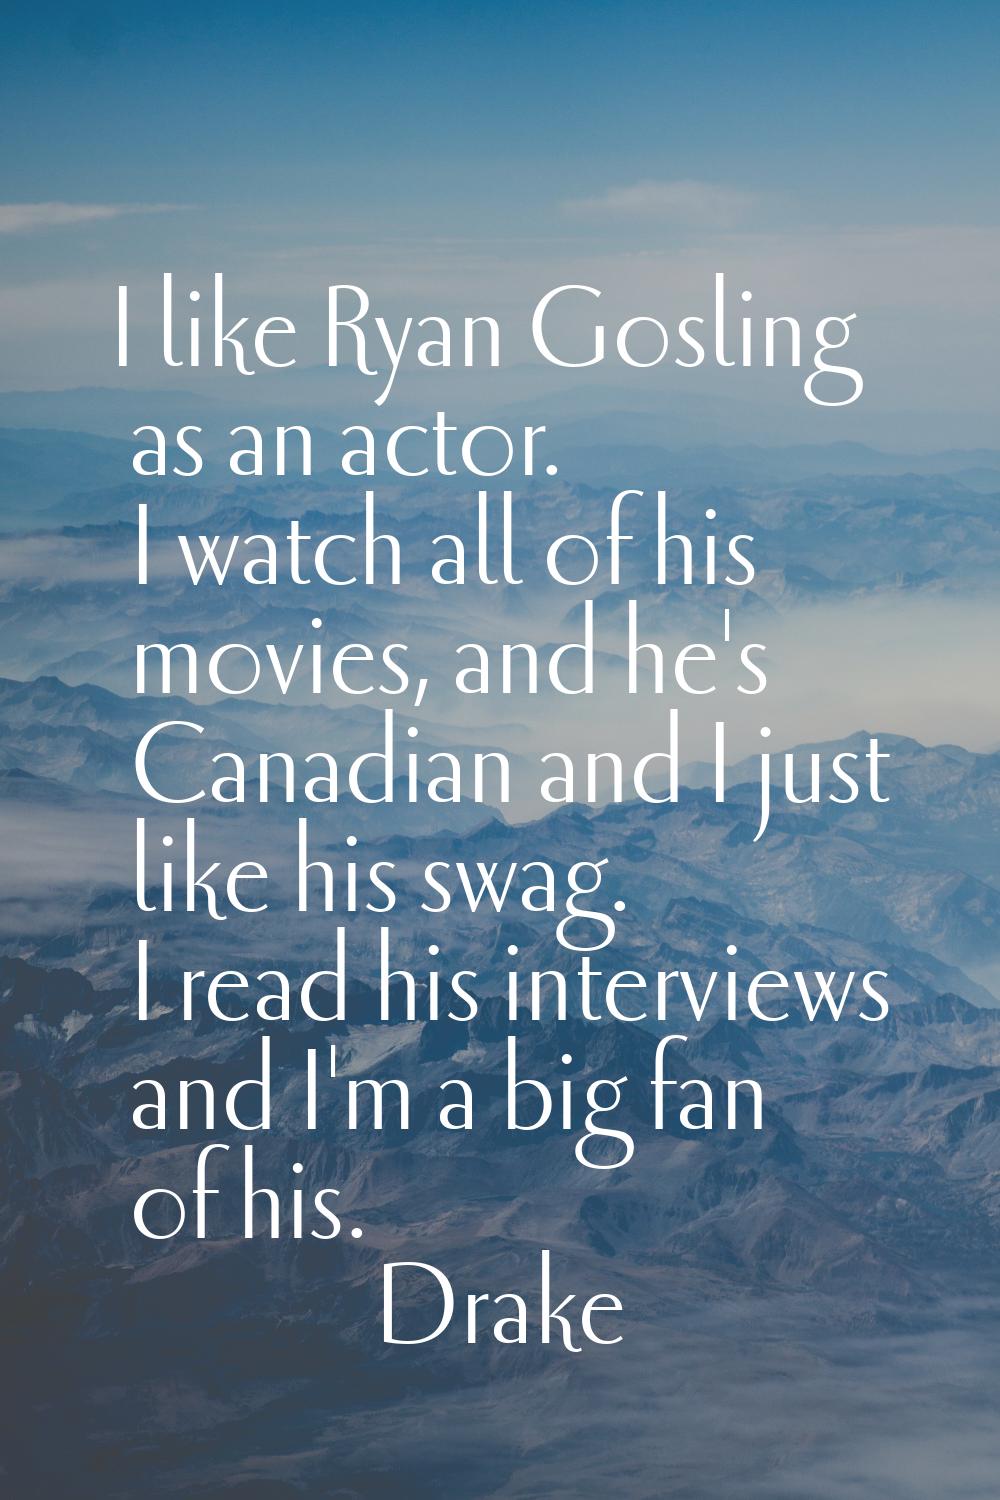 I like Ryan Gosling as an actor. I watch all of his movies, and he's Canadian and I just like his s